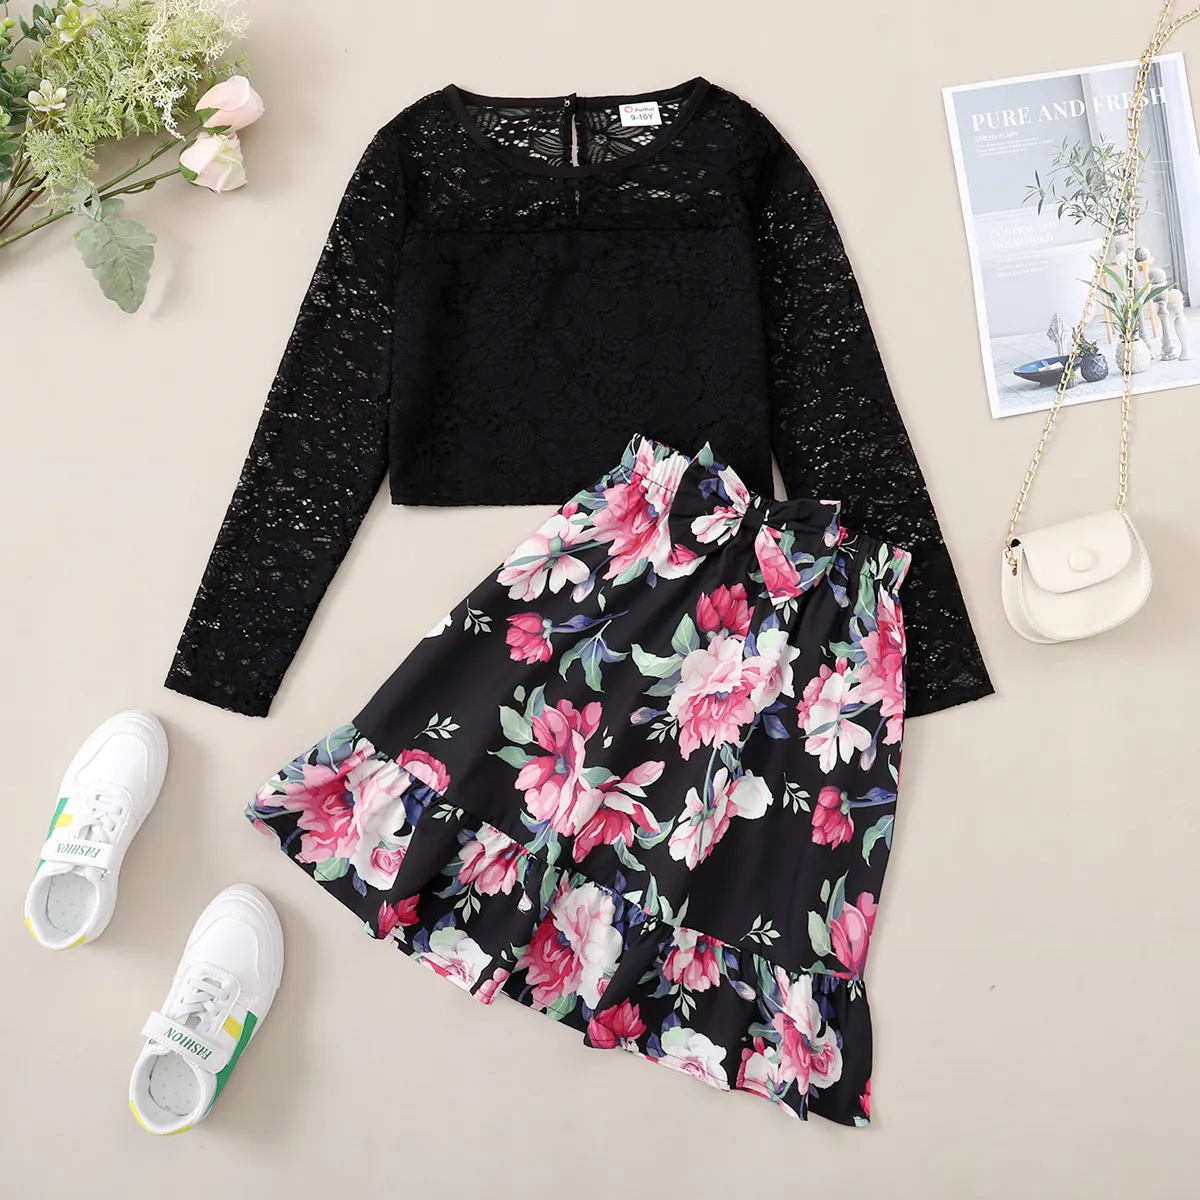 2-piece Kid Girl Lace Design Long-sleeve Tee And Bowknot Design Floral Print Skirt Set